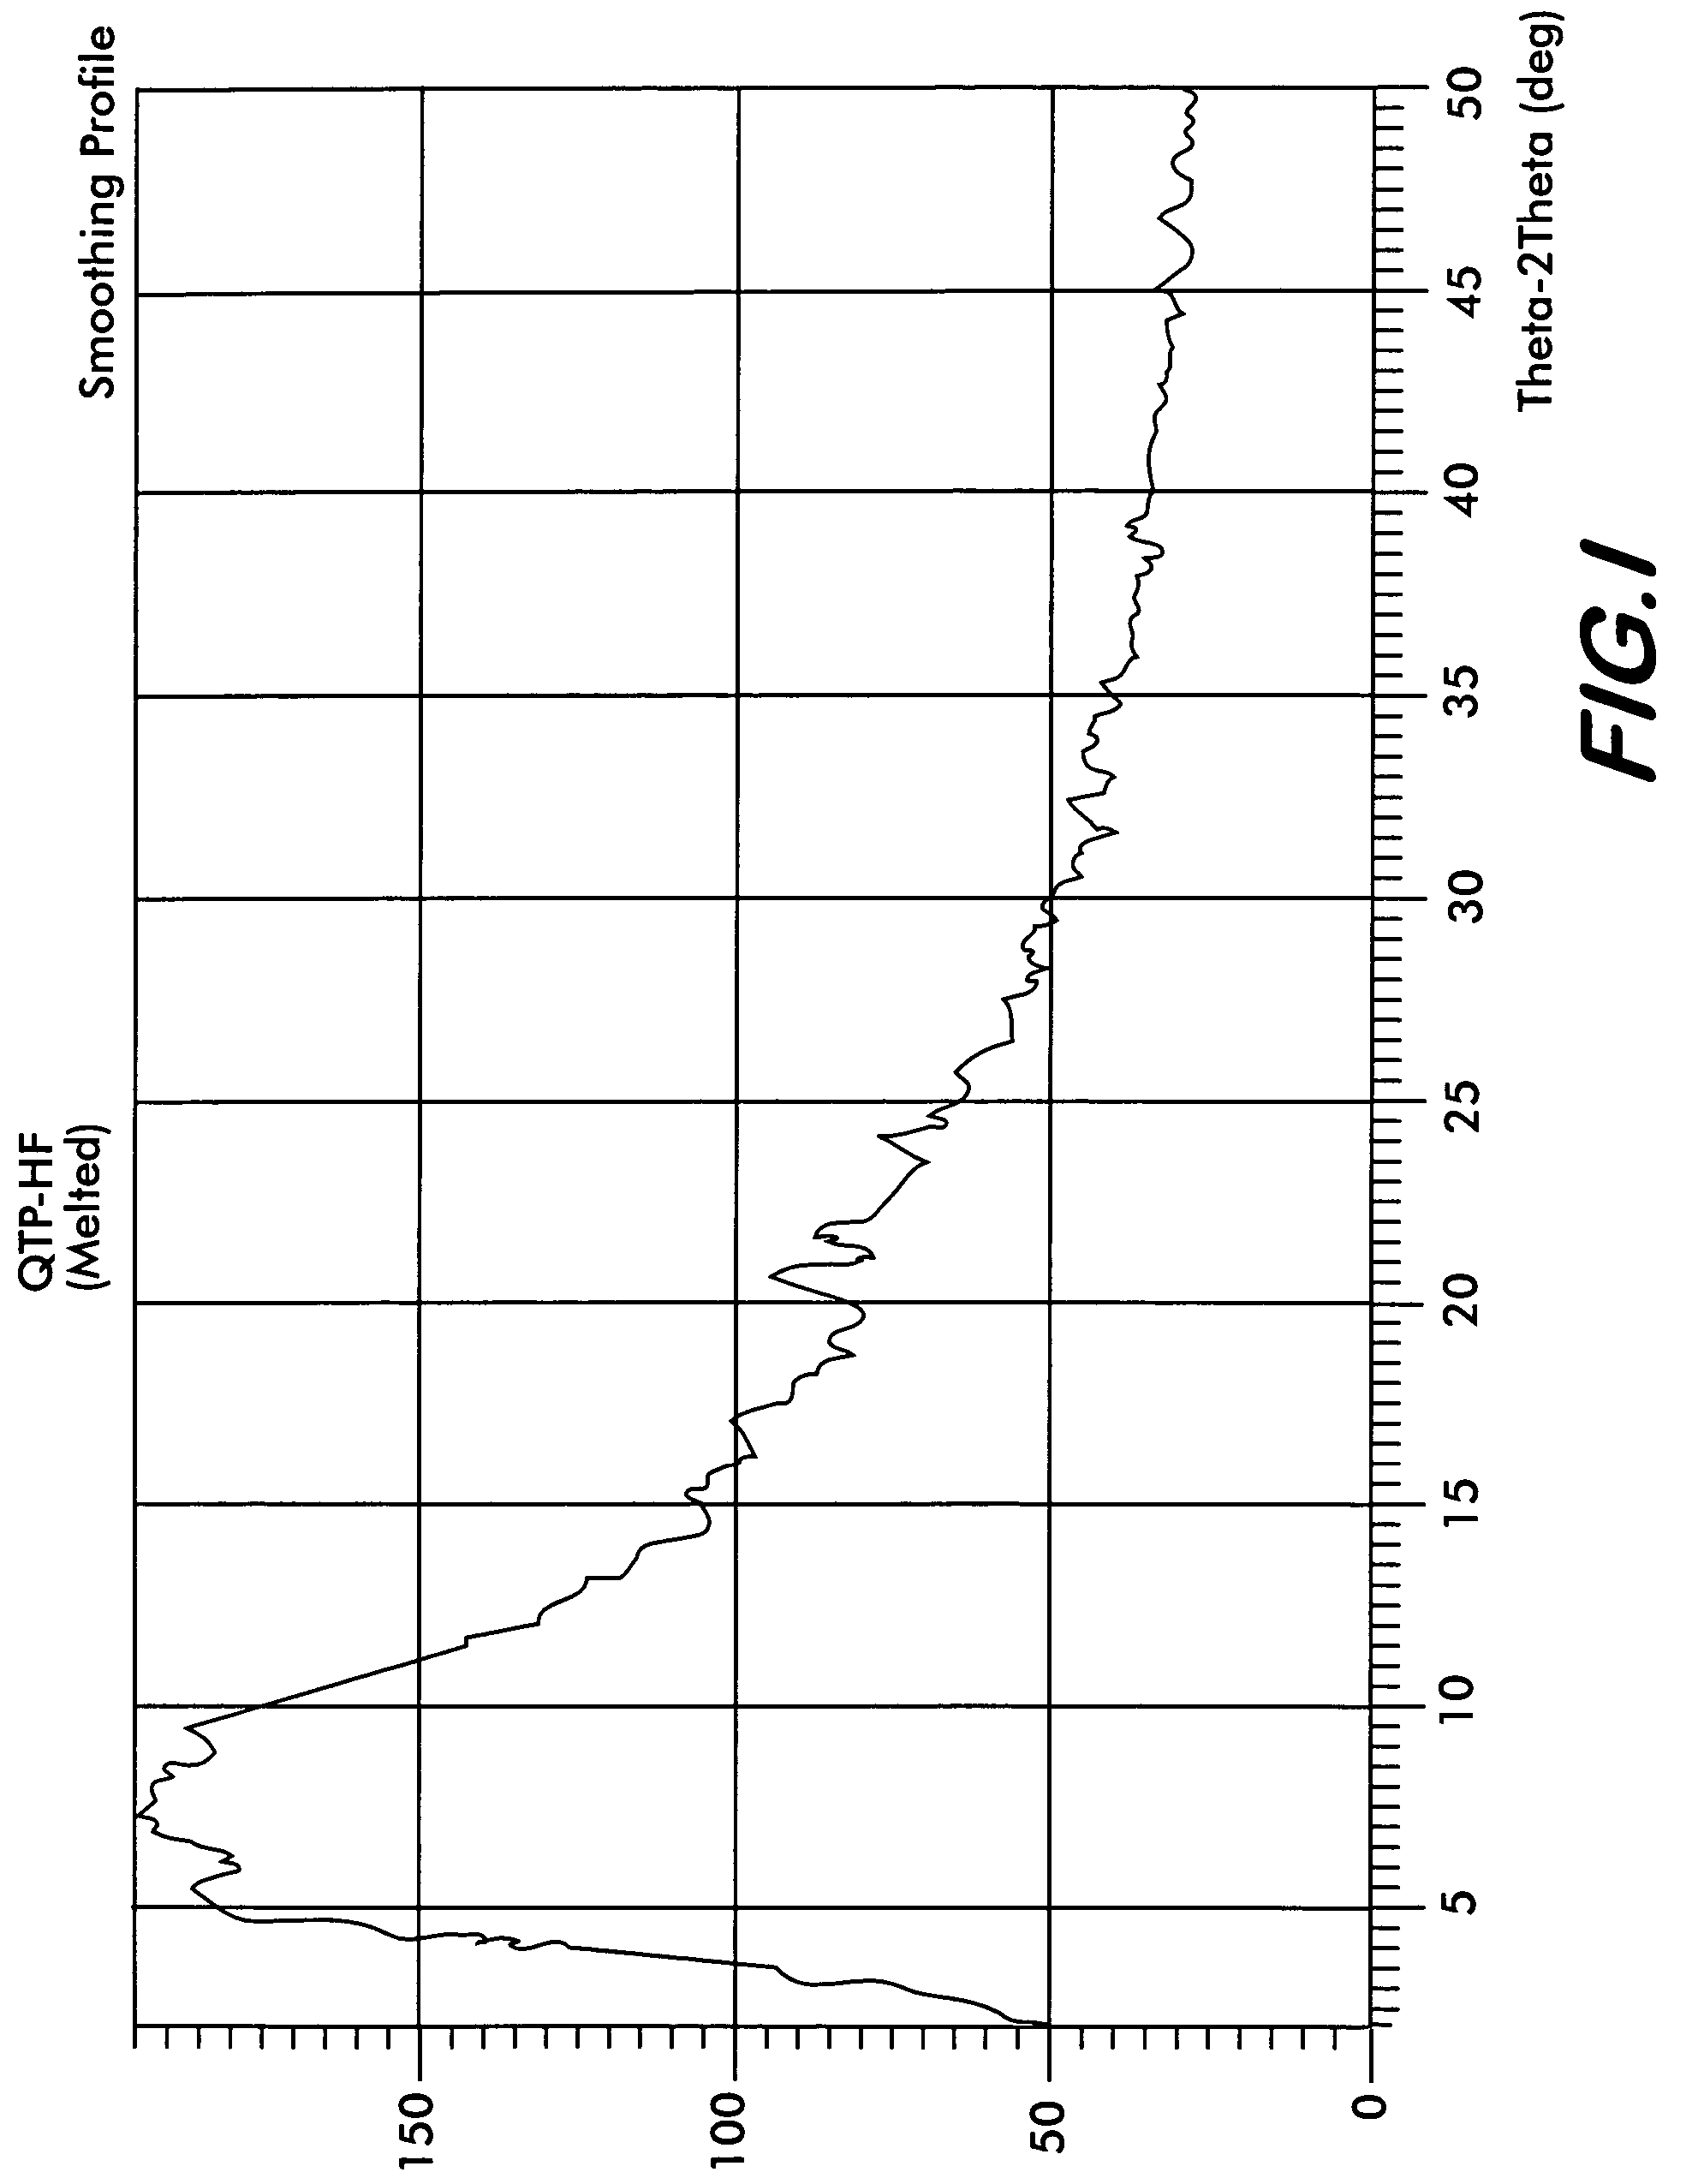 Polymorph of Quetiapine fumarate and a process for its preparation